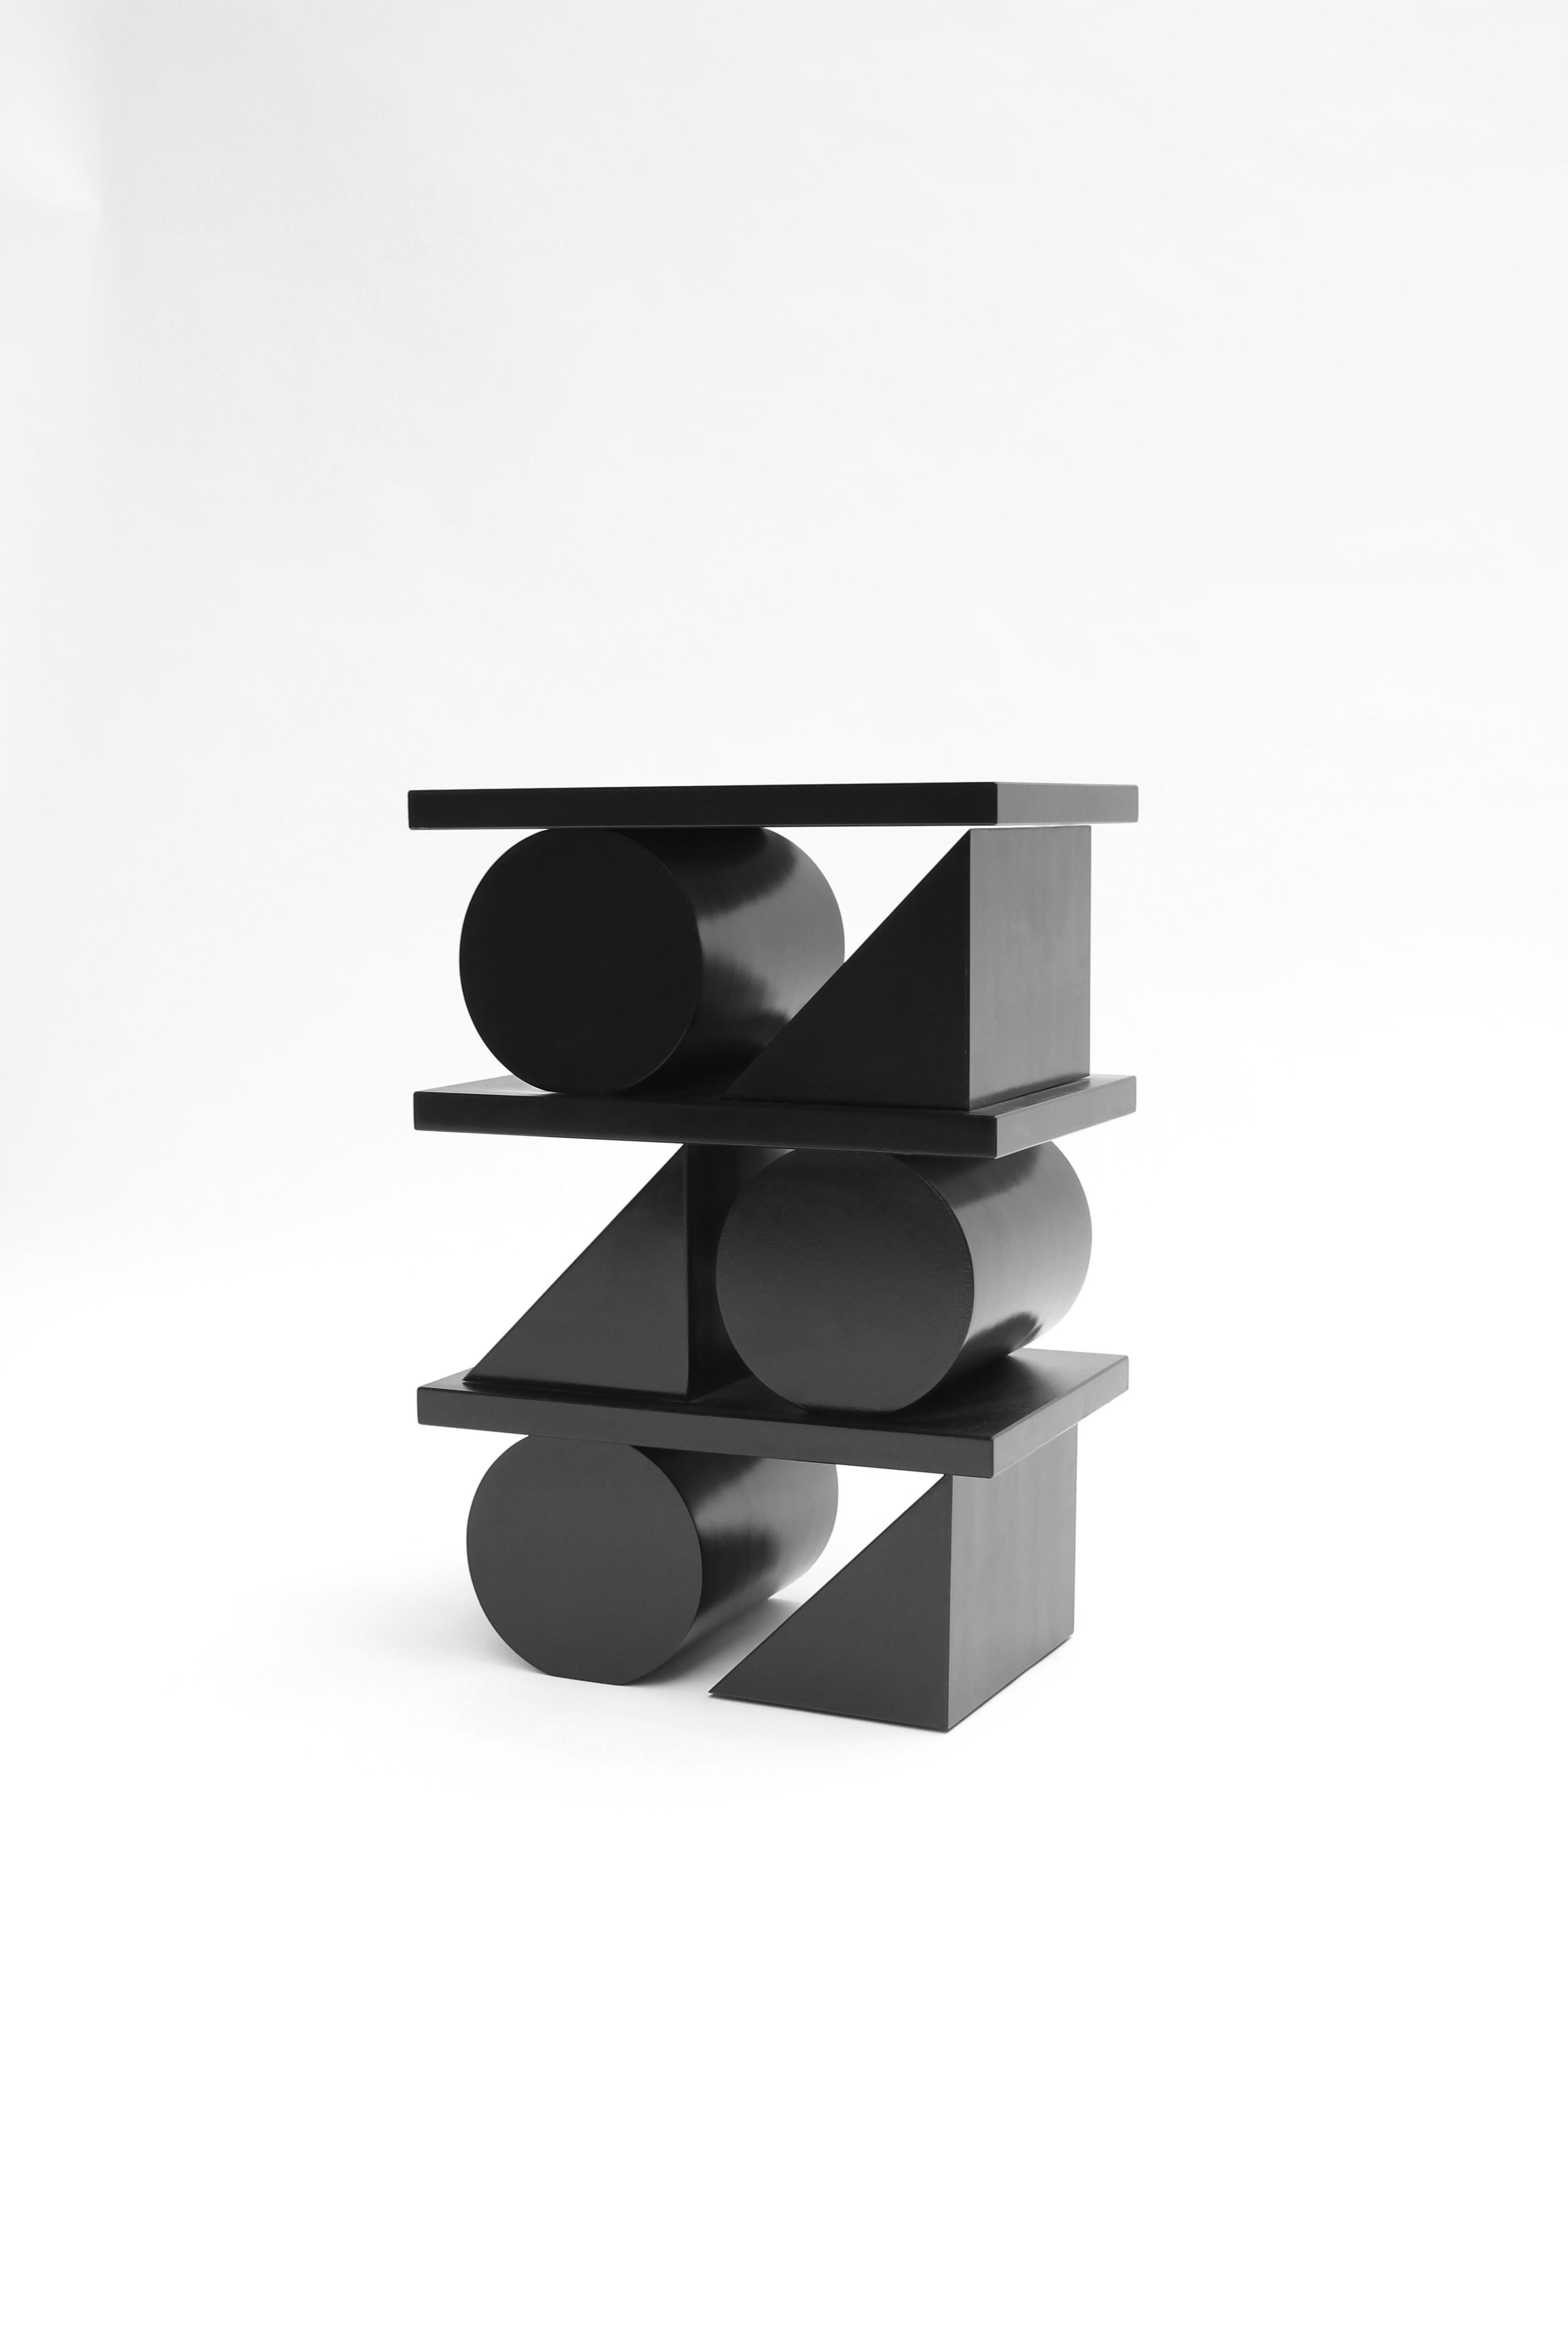 X4 is an ongoing series of simple graphic forms that create timeless and enduring designs. The handcrafted wooden pieces sit somewhere between furniture, objects and sculpture. The contrast of the minimalistic shapes and traditional craft goes